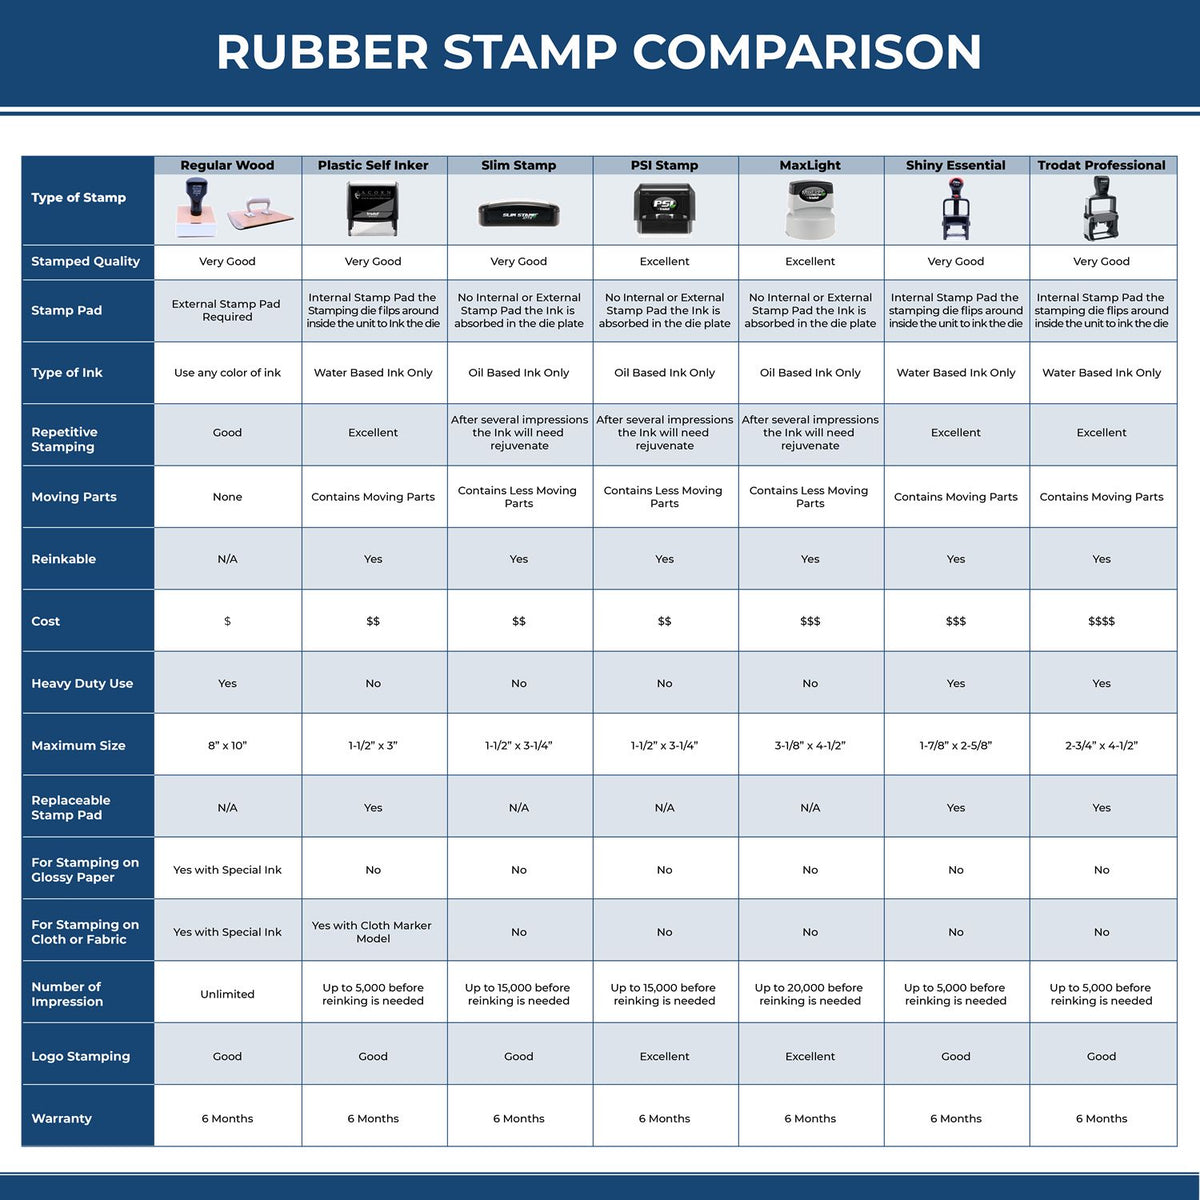 Large Self-Inking Void with Box Stamp 5560S Rubber Stamp Comparison